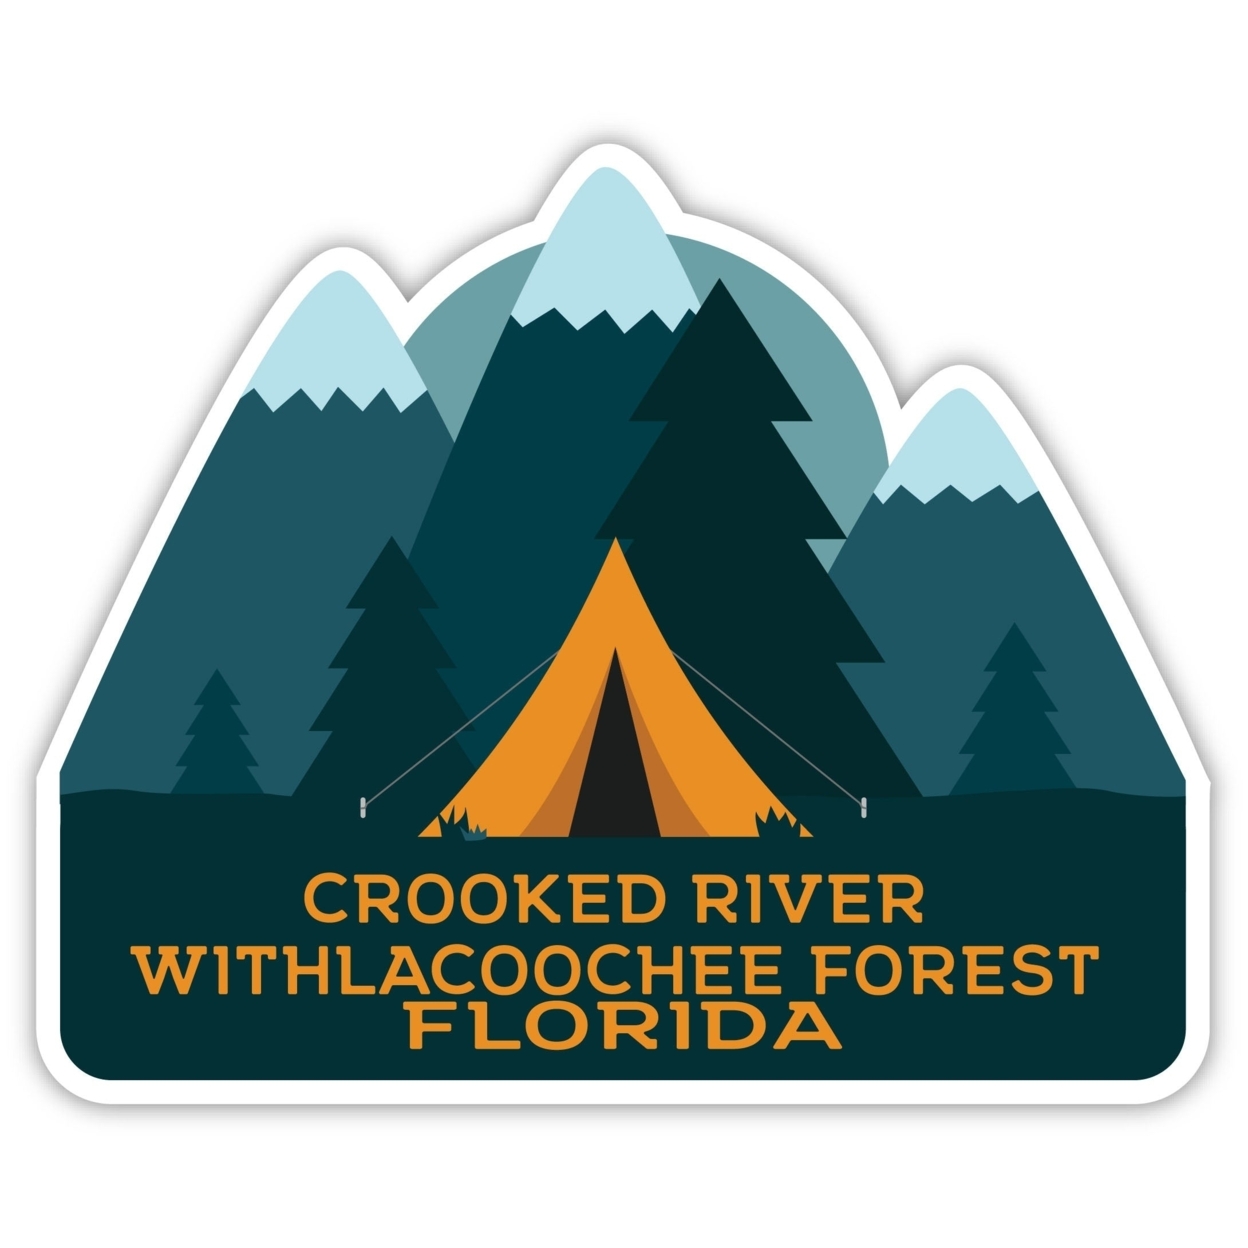 Crooked River Withlacoochee Forest Florida Souvenir Decorative Stickers (Choose Theme And Size) - 4-Pack, 4-Inch, Tent